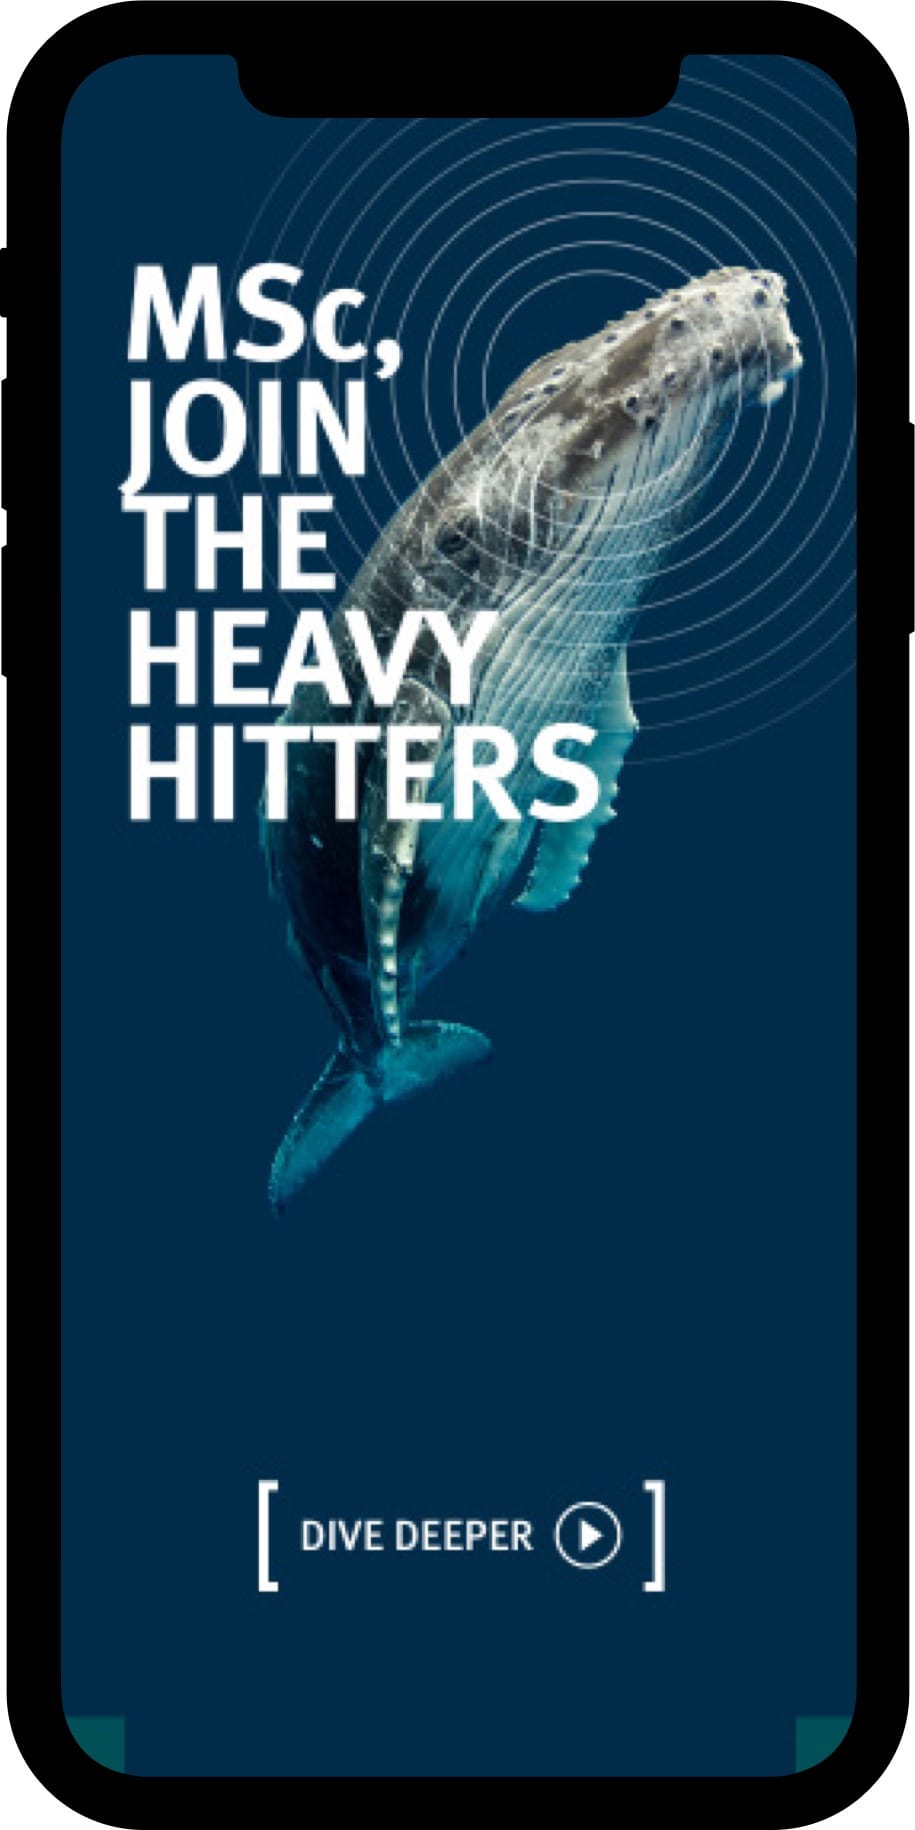 Cass microsite, the whale 'MSc, join the heavy hitters', on a mobile phone